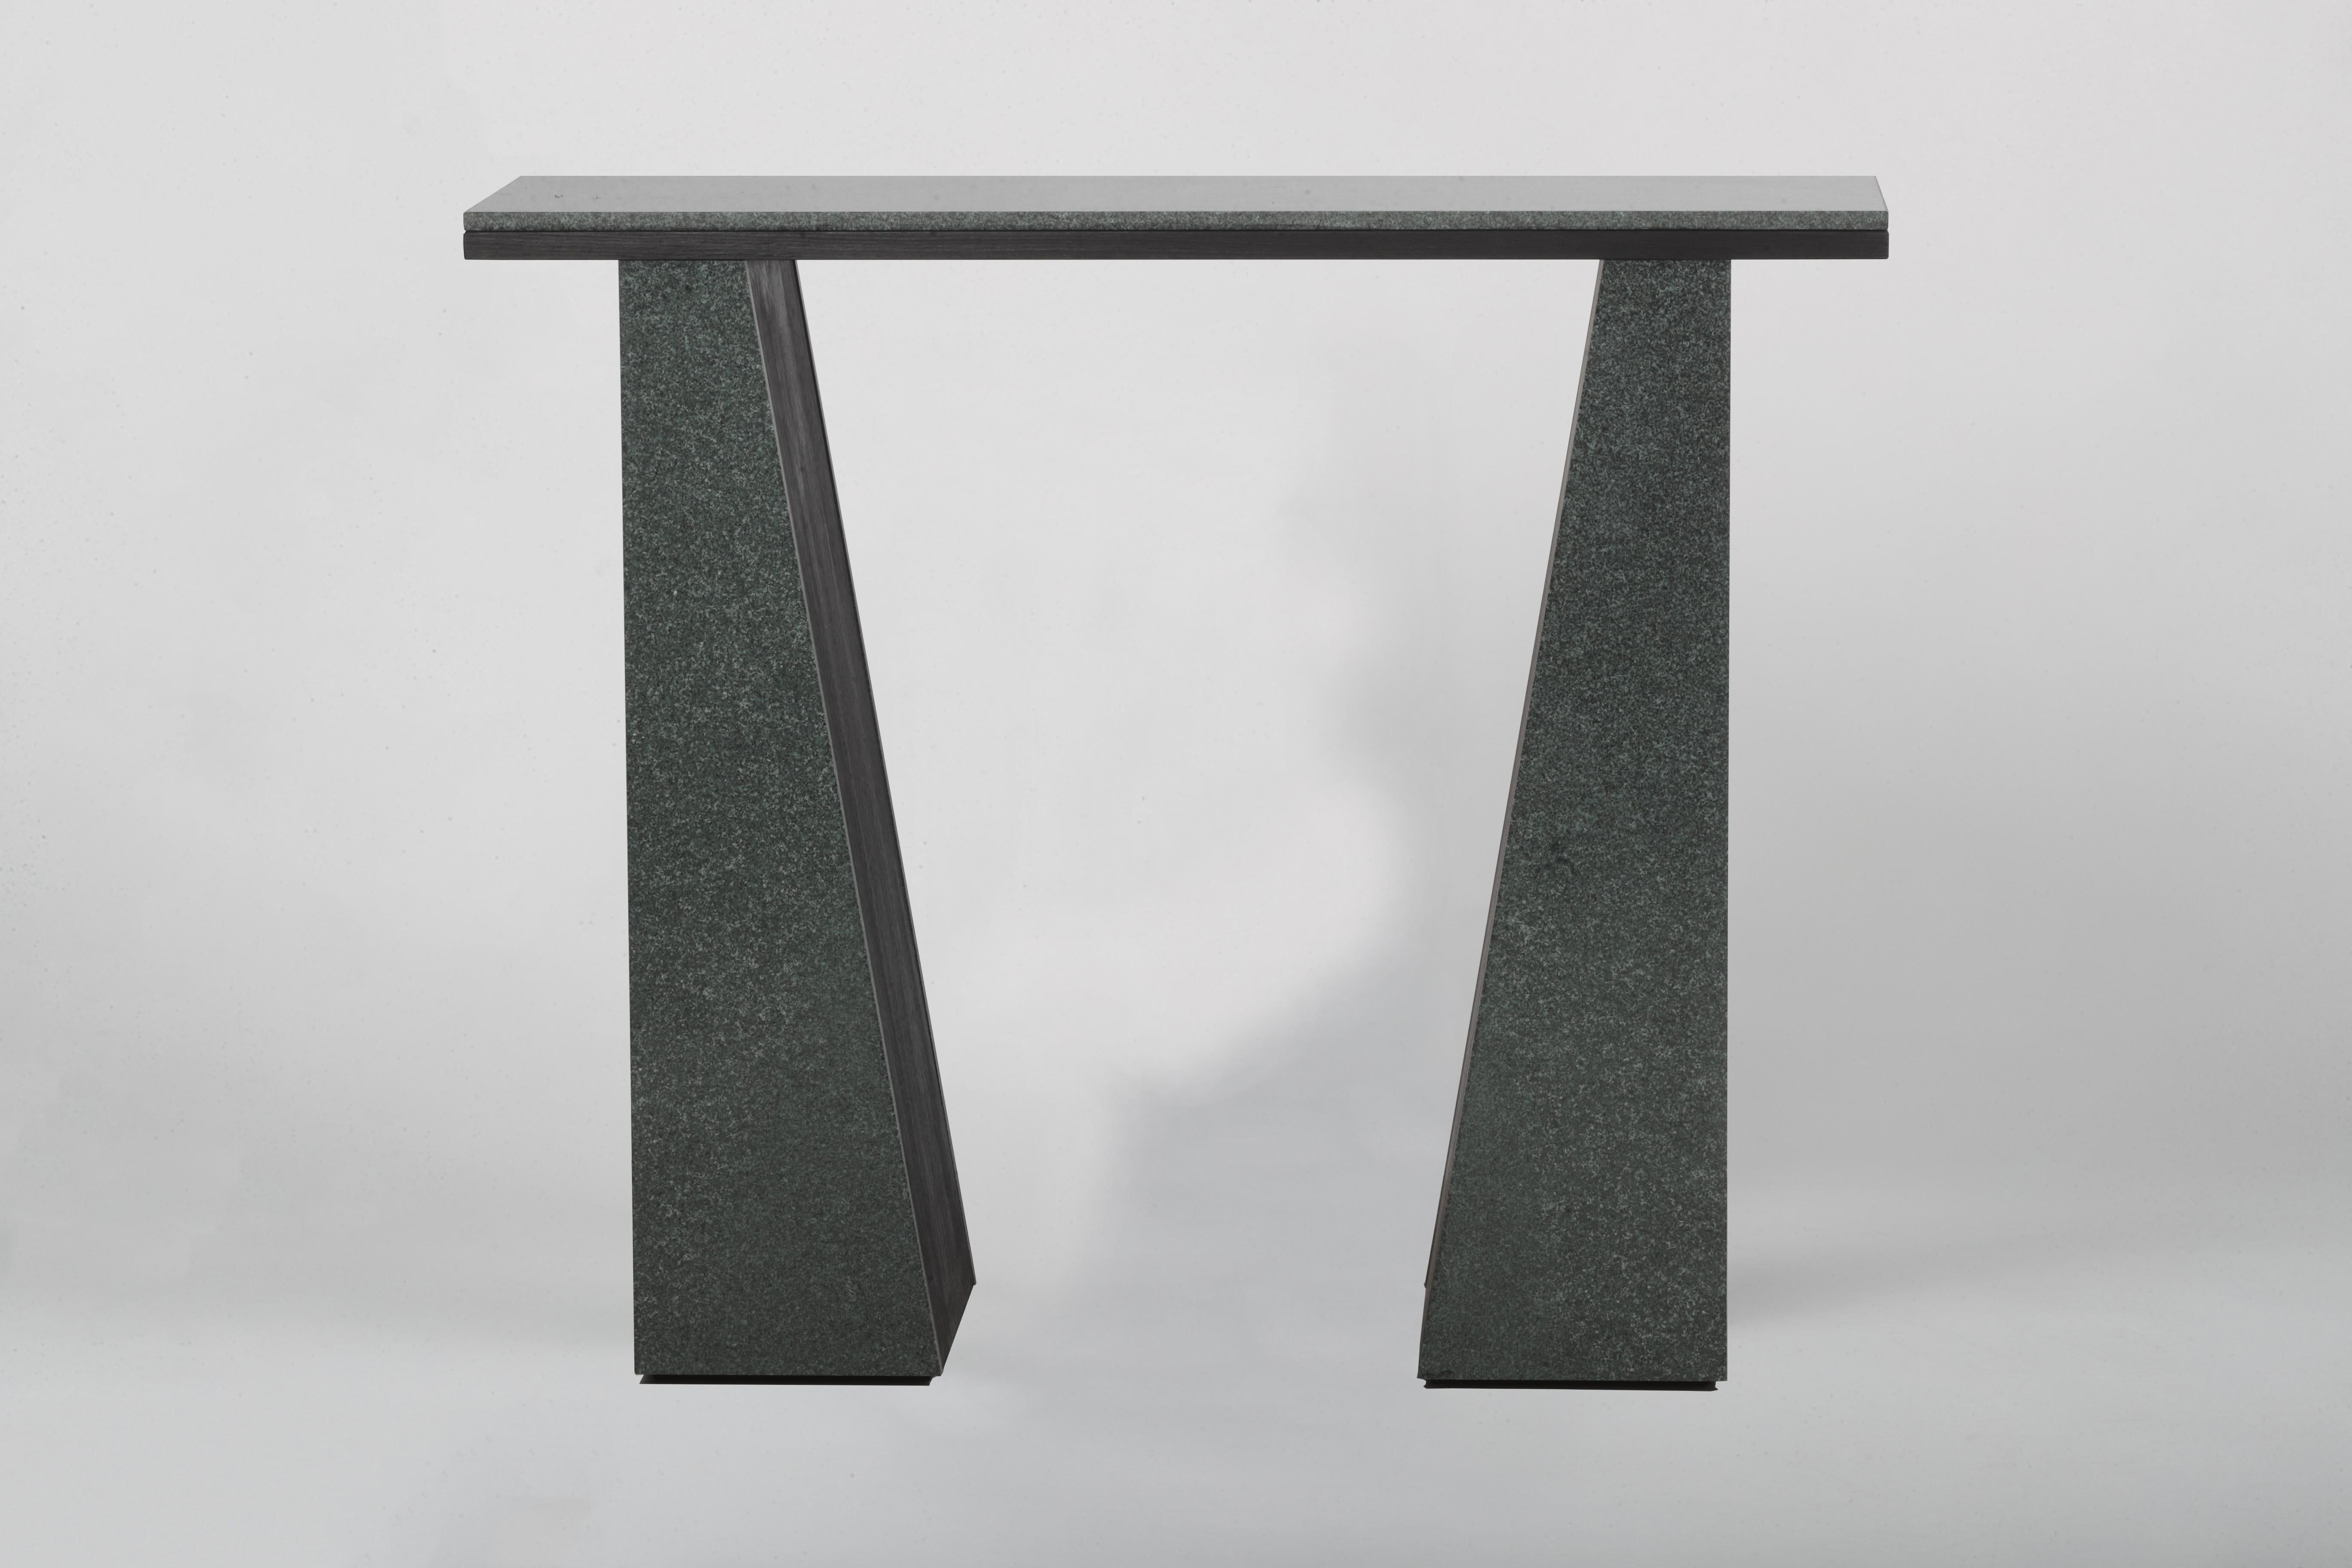 A unique complementary piece. The perfect harmony of diabase stone and black wood. It is a minimal solution for corners which need an elegant surface. Could be the first thing you’ll see in the entrance when you come home or an essential part of an